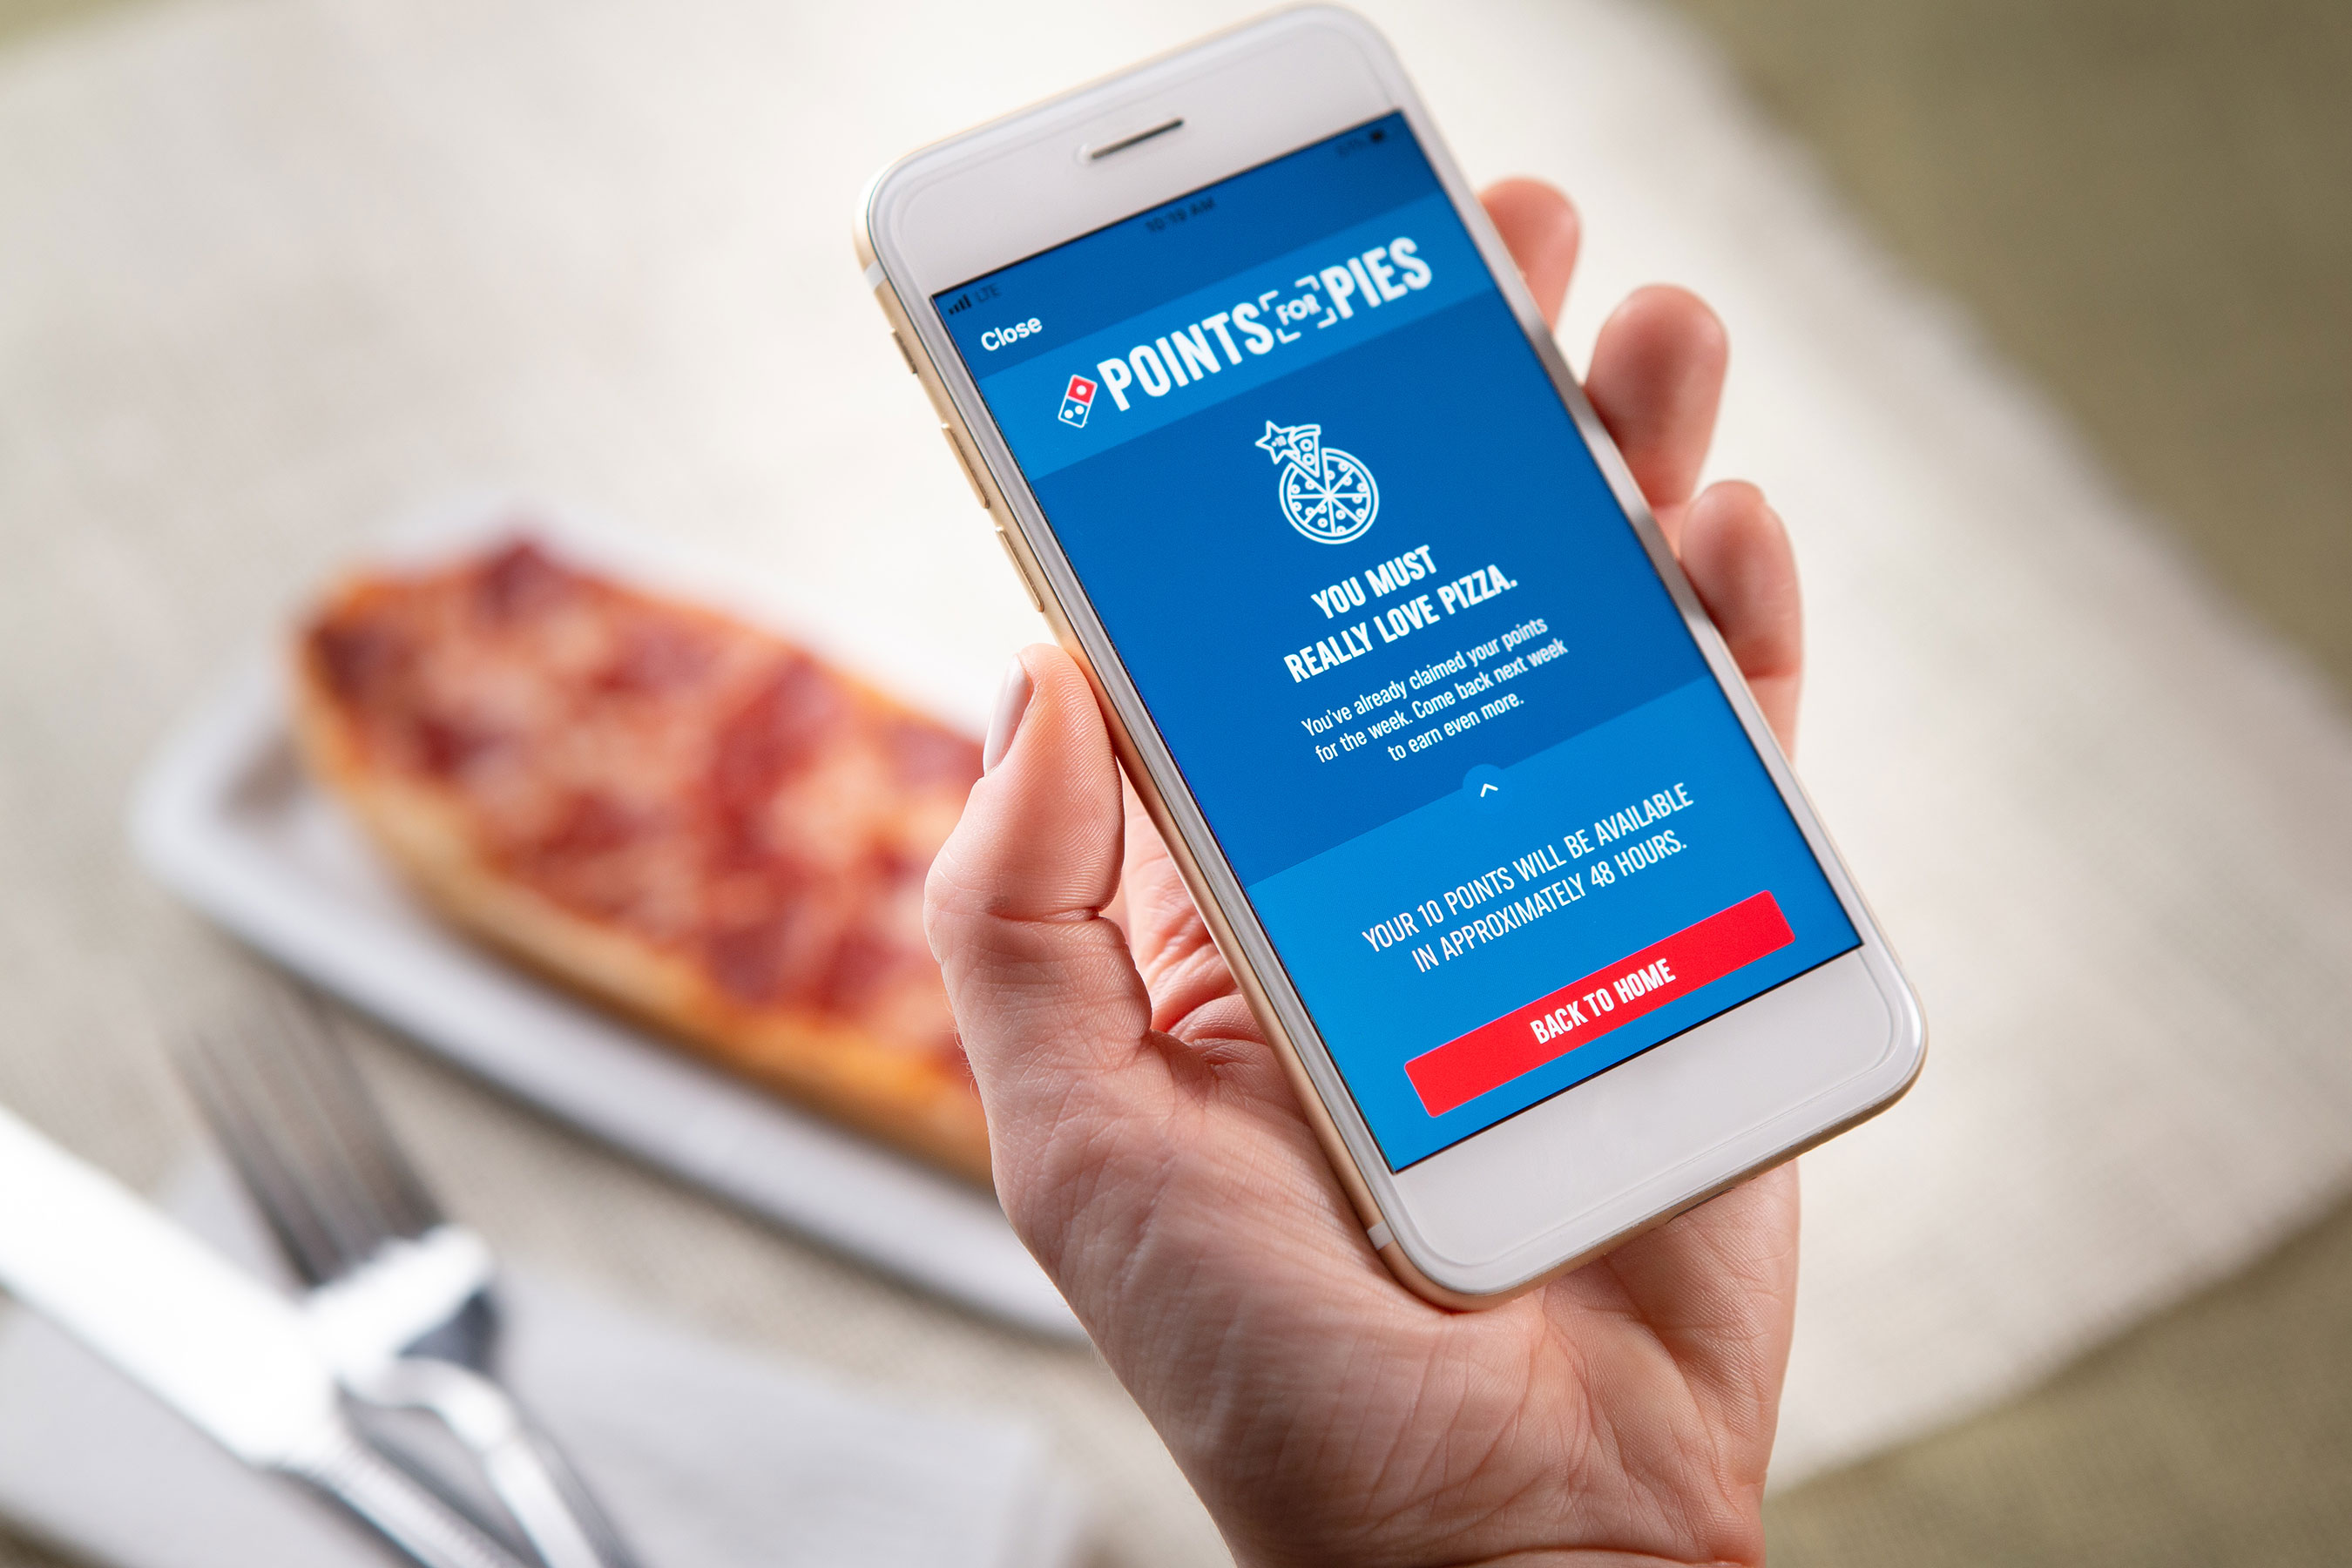 Domino's Points for Pies